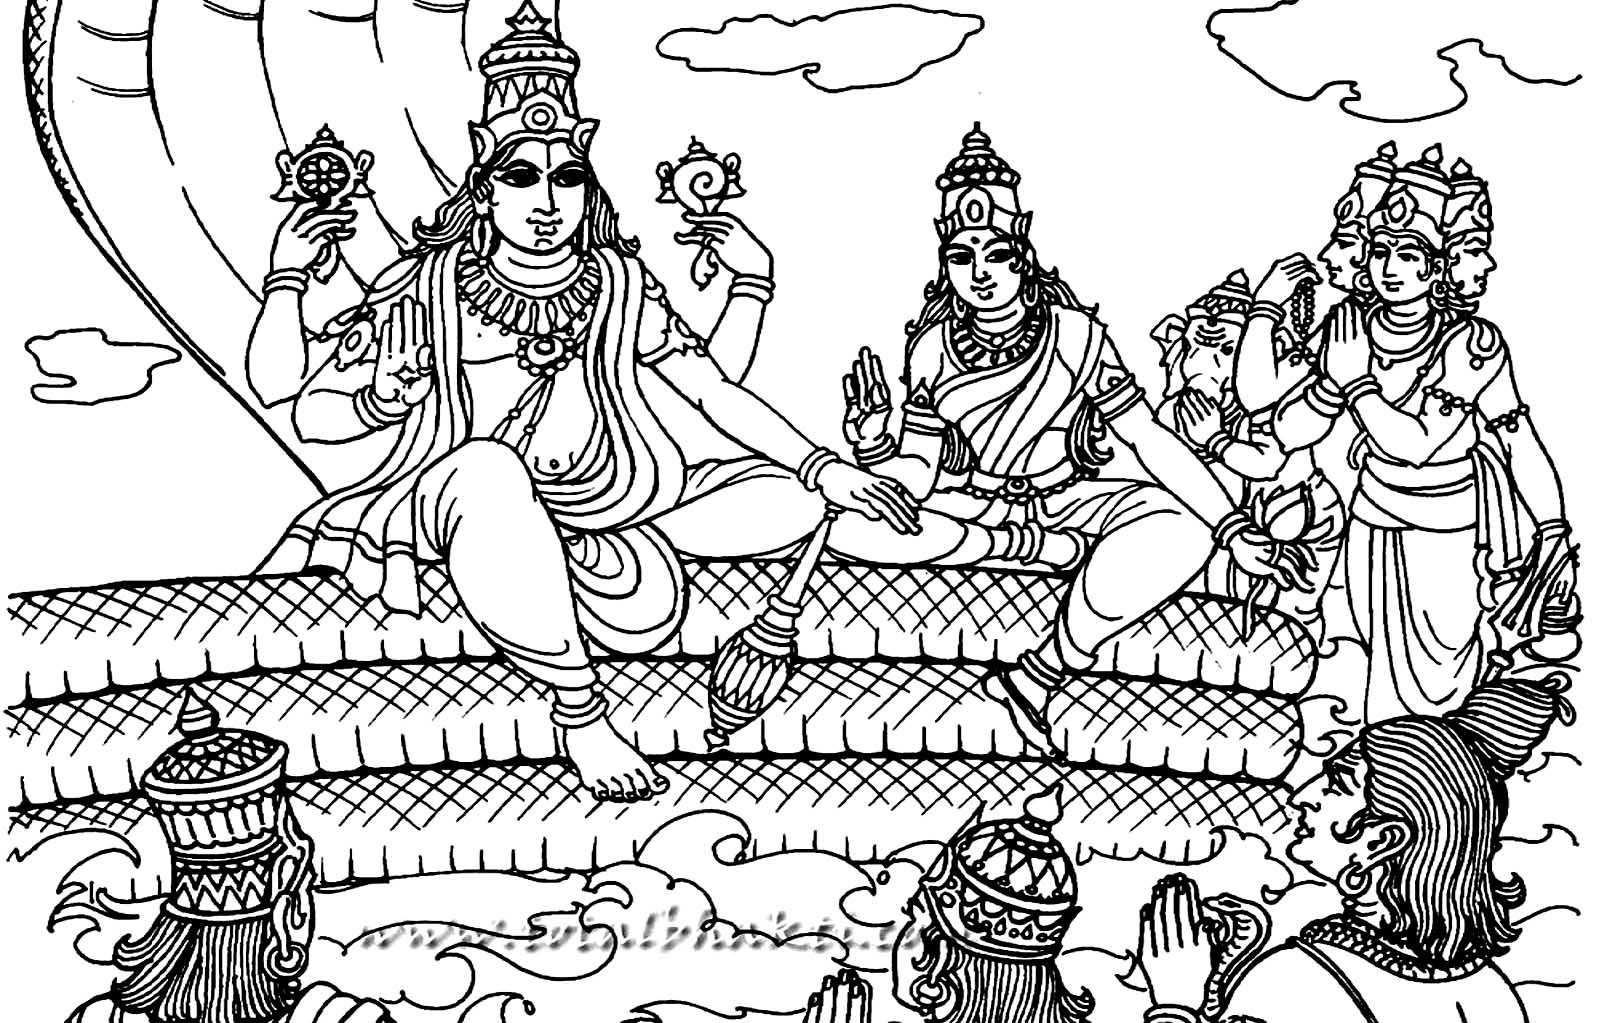 How to Draw LORD VISHNU DRAWING step by step - YouTube